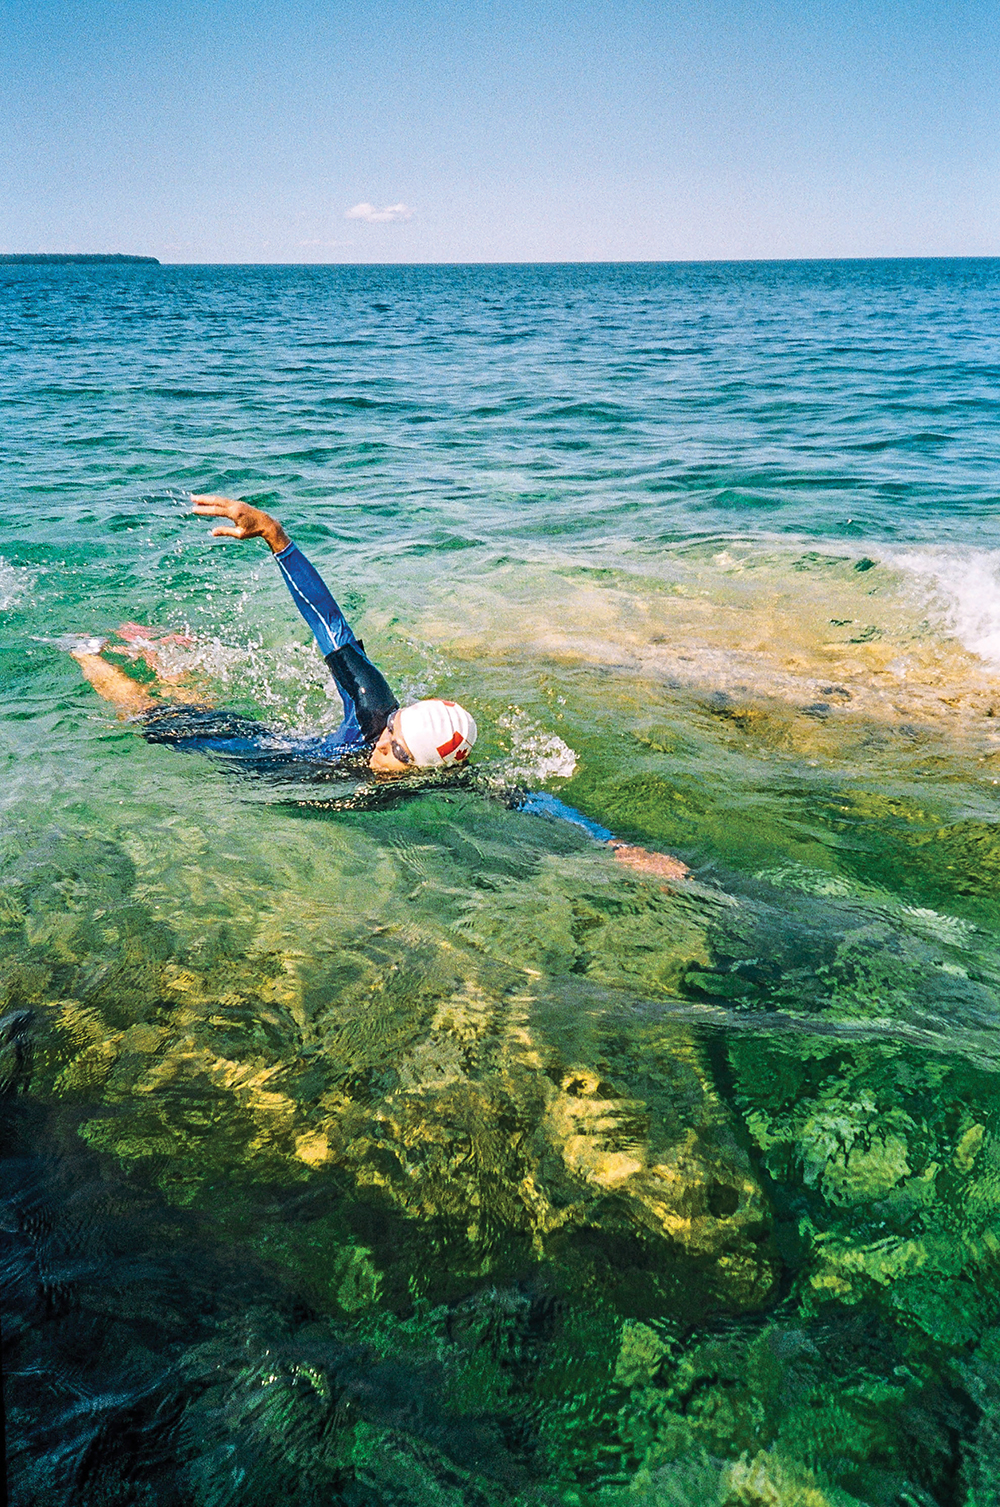 Micaela von Richthofen swimming in the crystal clear waters of Georgian Bay near Tobermory.